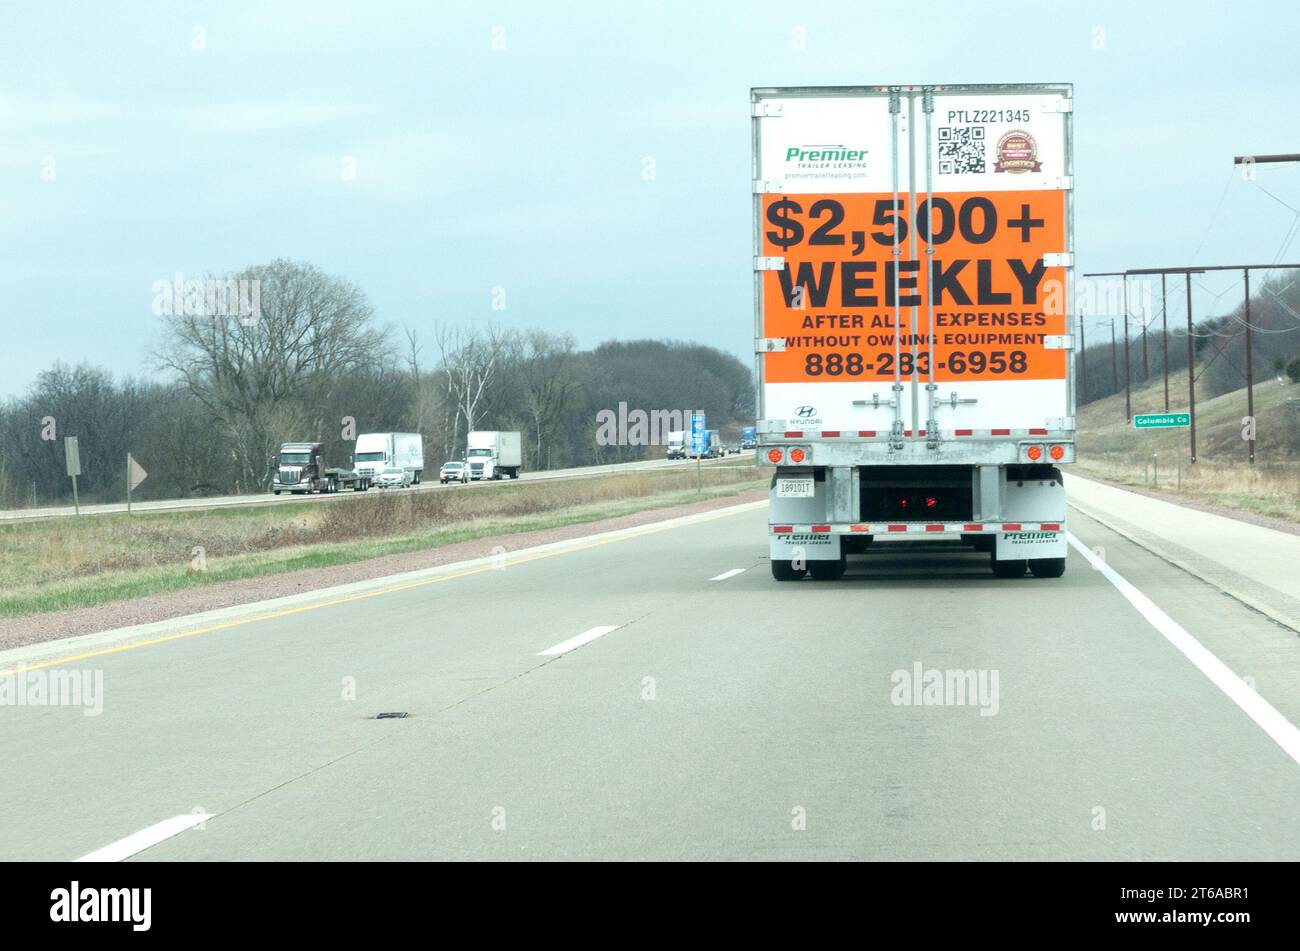 Truck advertising a driving job at $2,500+ a week on the back panel while driving on the freeway. Freeway 94 Wisconsin MN USA Stock Photo